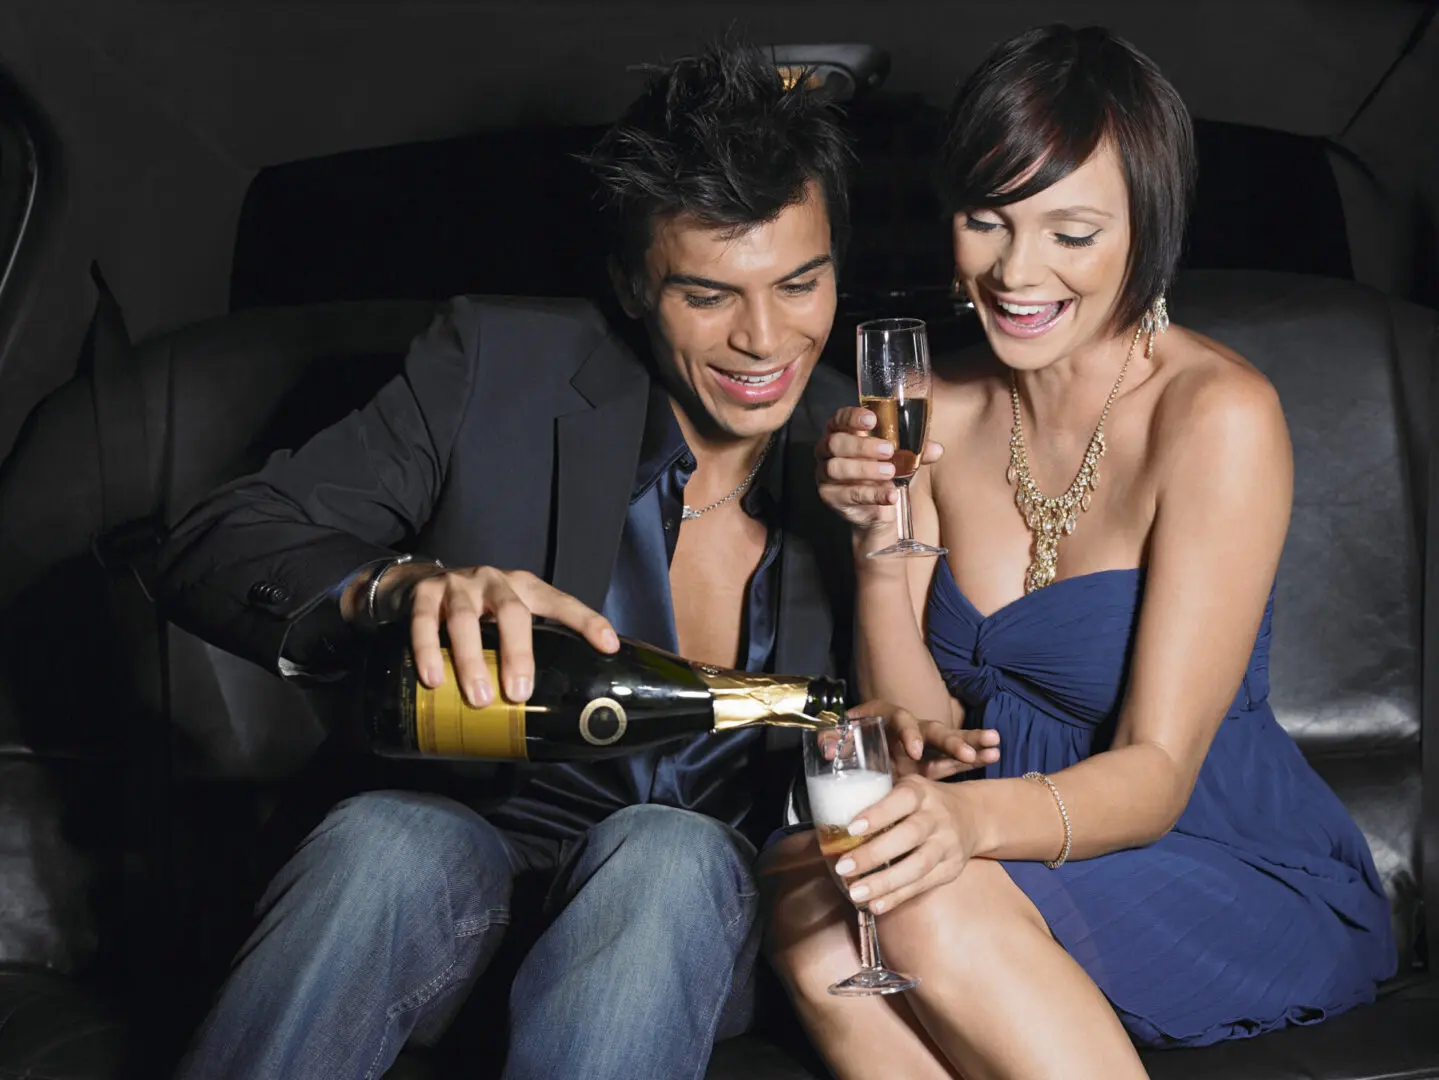 Couple enjoying champagne in a luxury event limousine limo - cascade limo service calgary